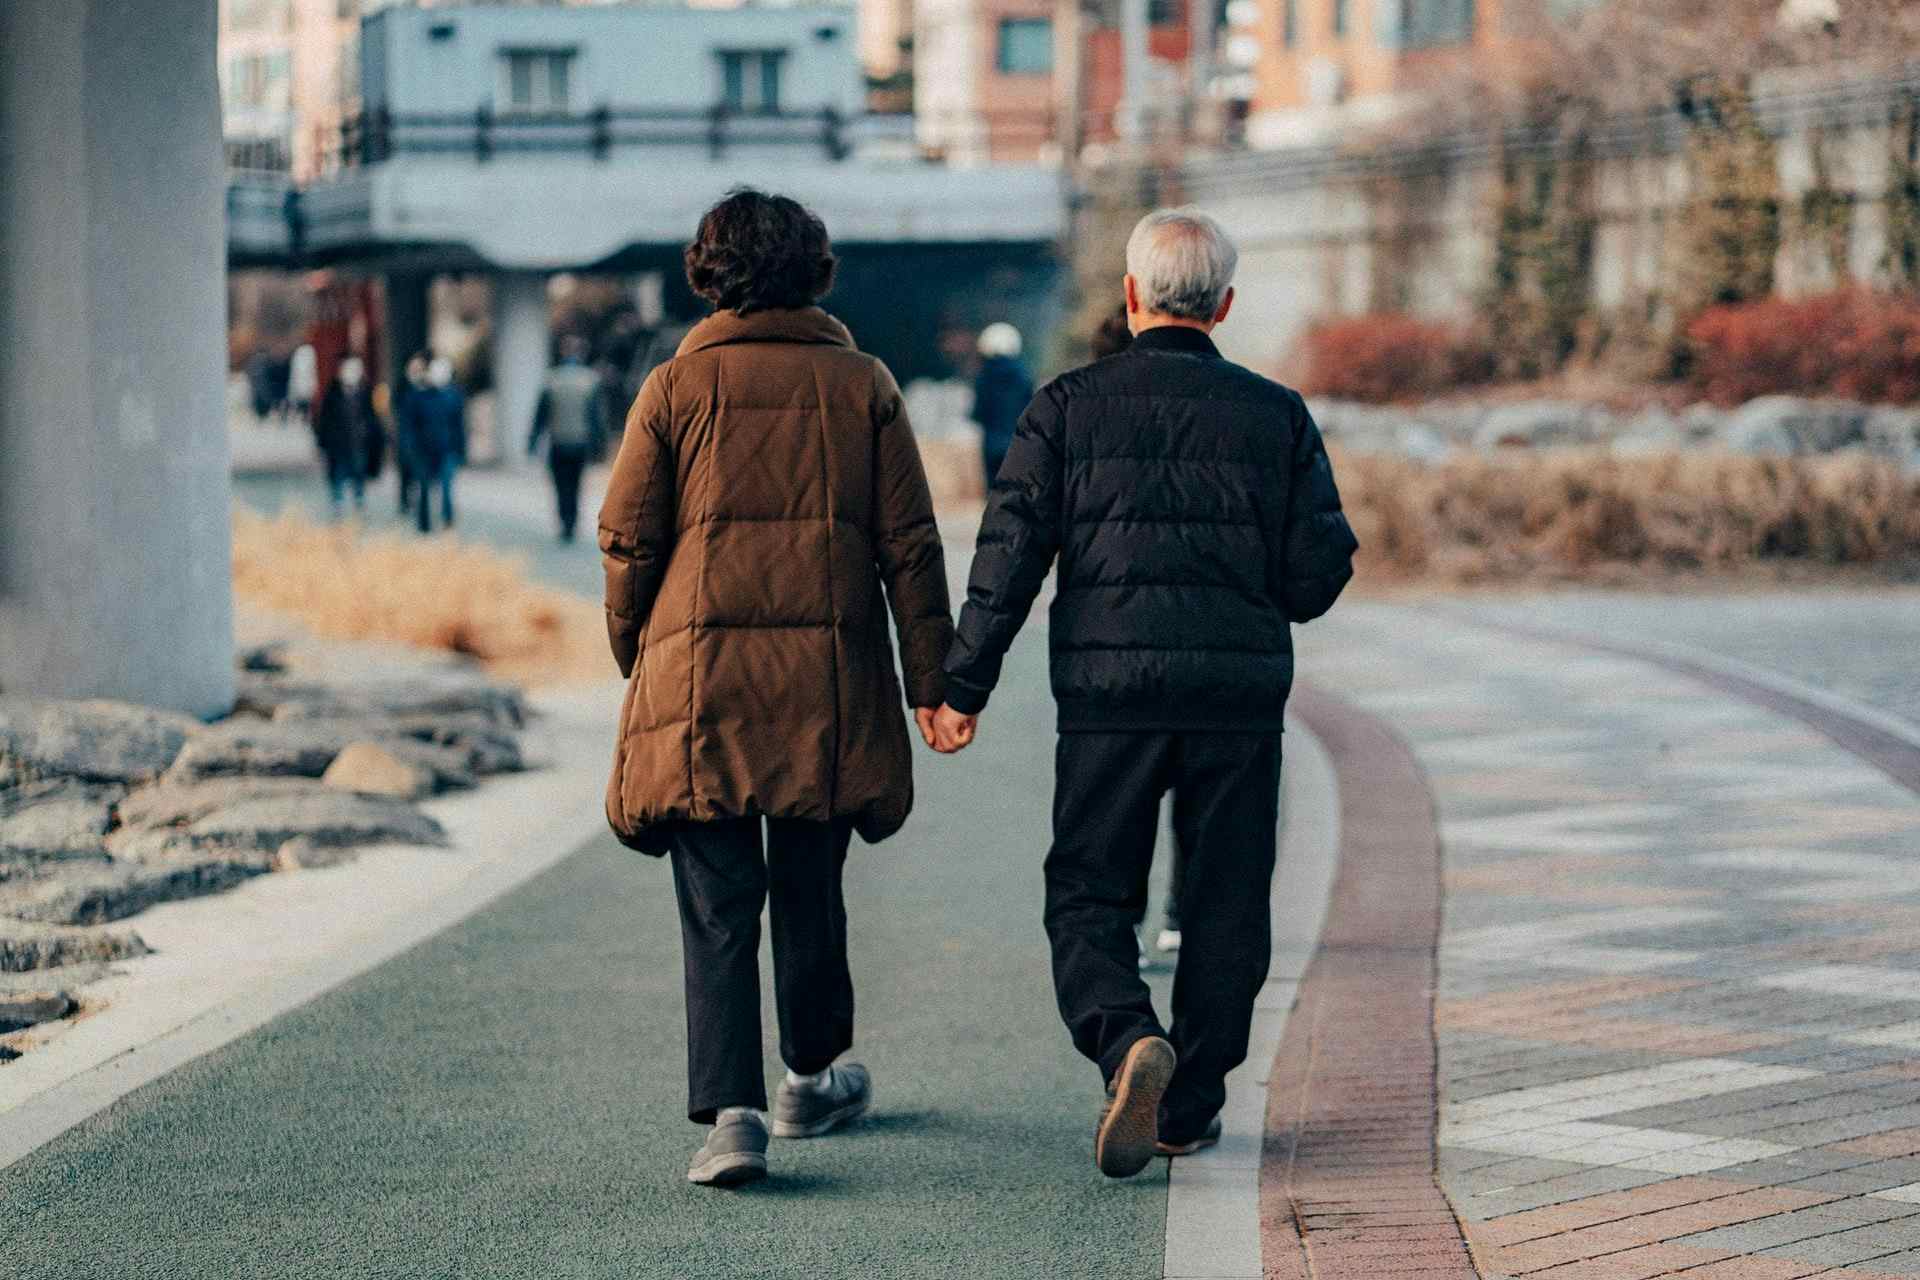 Why is dating hard after 50?